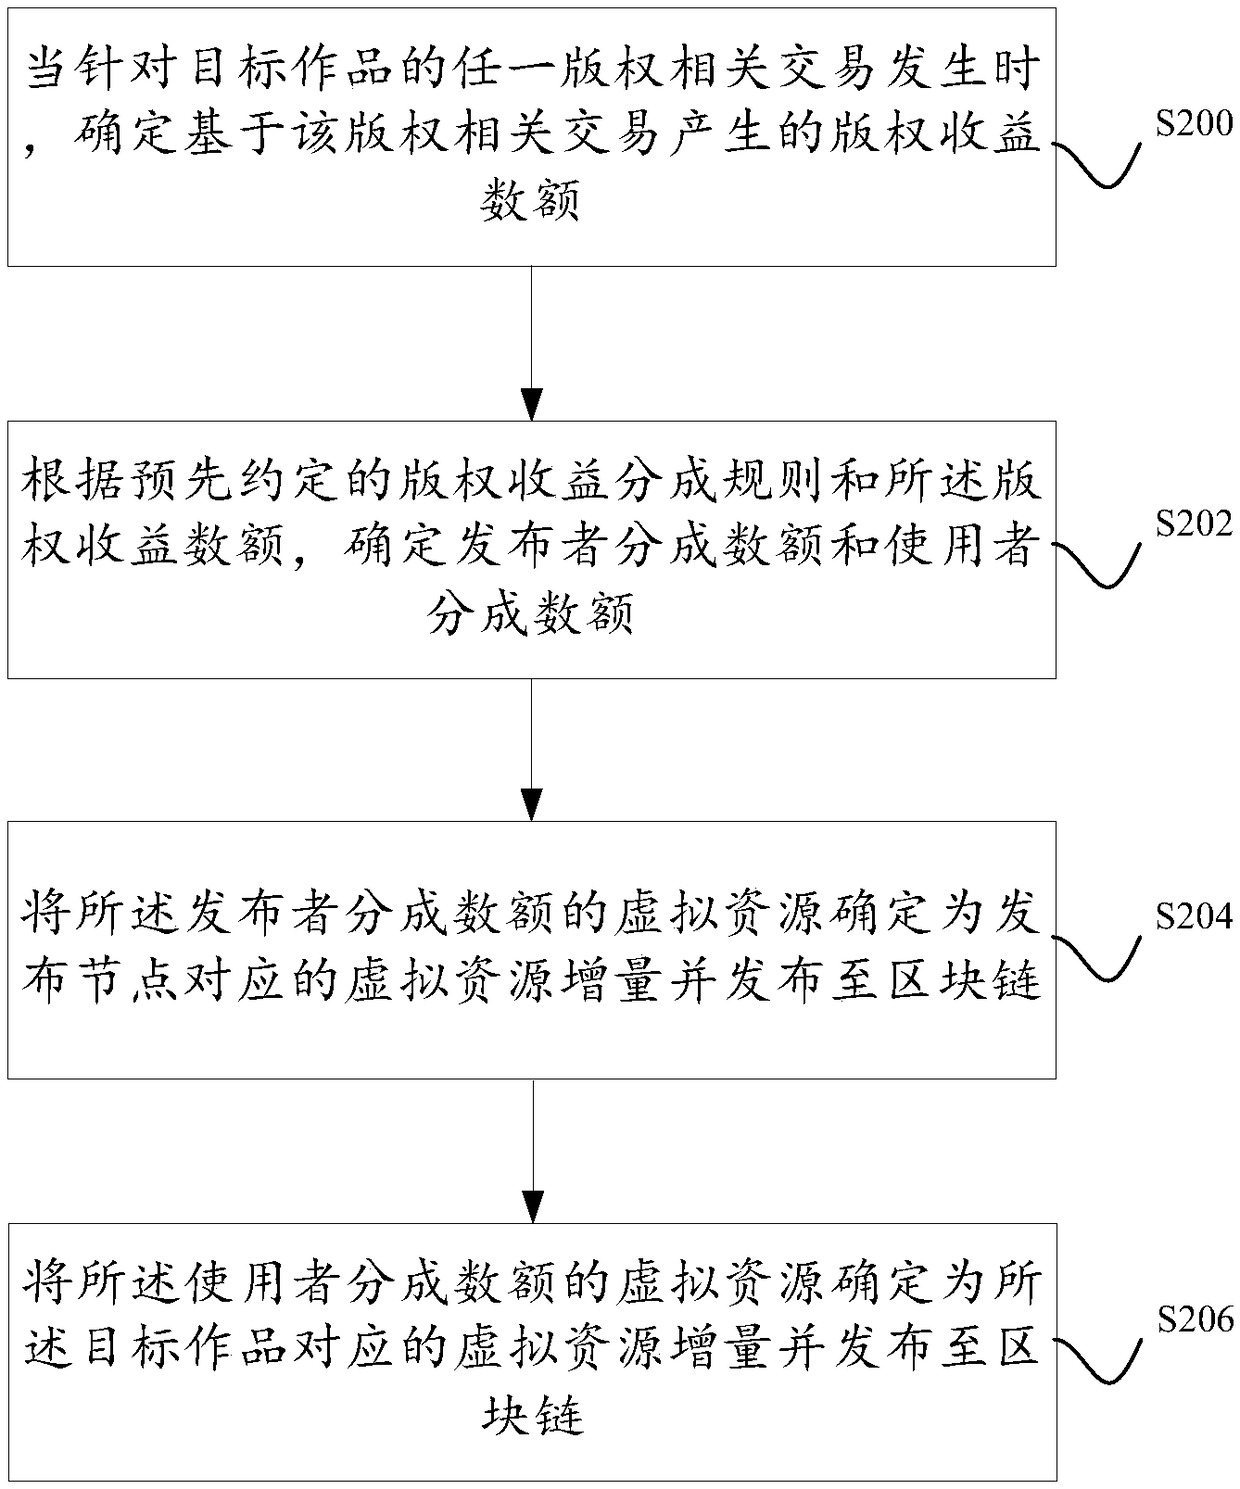 A method and apparatus for awarding a user of a work based on a block chain